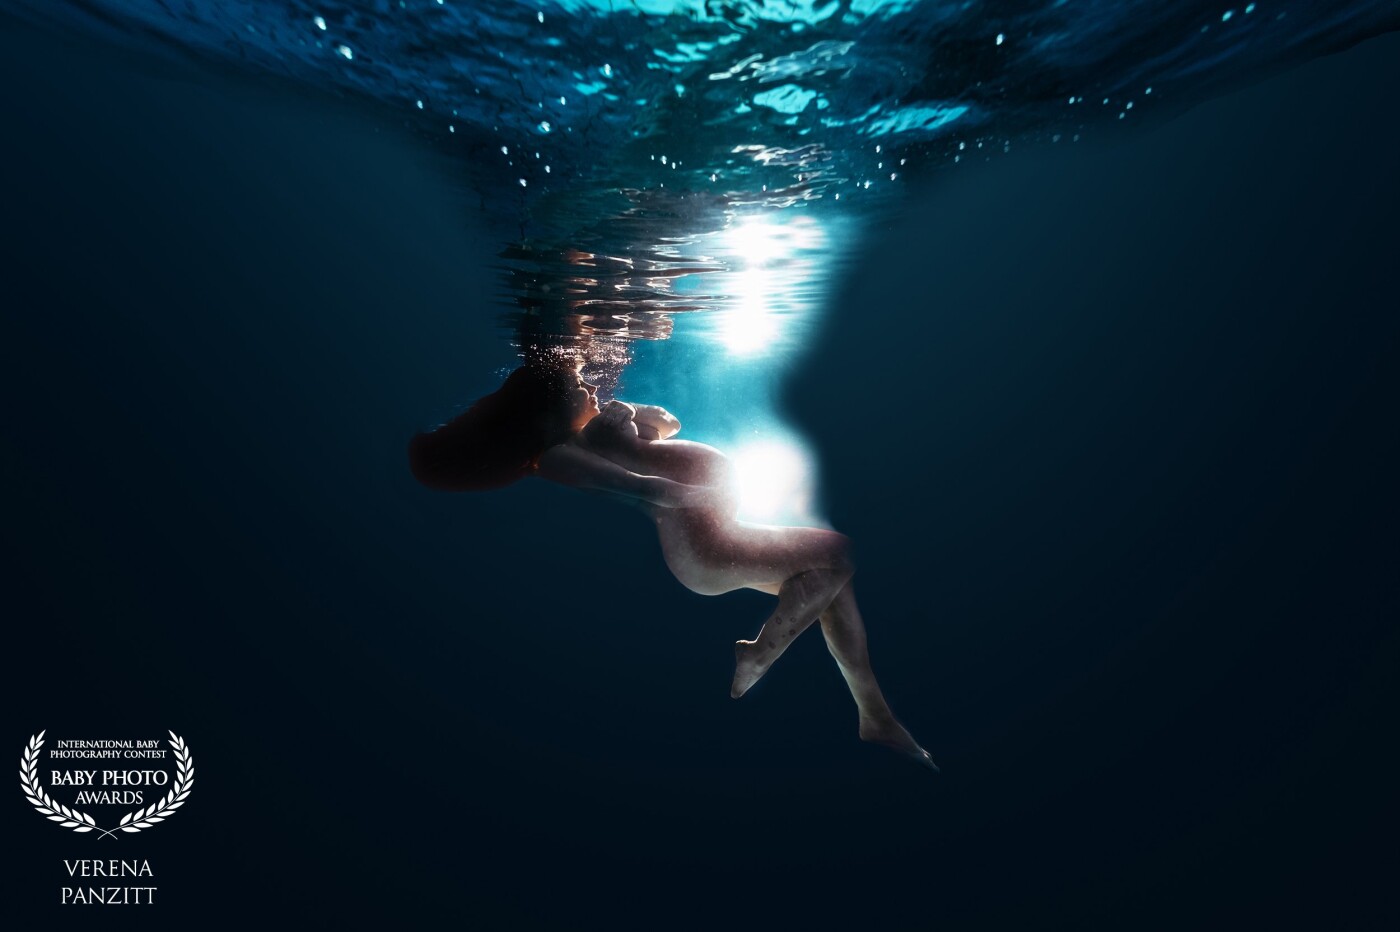 Underwater is such a unique way to photograph a woman. The weightlessness allows the woman to float and present her body in a elegant, graceful and uniquely way.  The pregnant woman floating in the water can also achieve the idea of the gracefulness and maternal image of her unborn baby that floats on her womb.